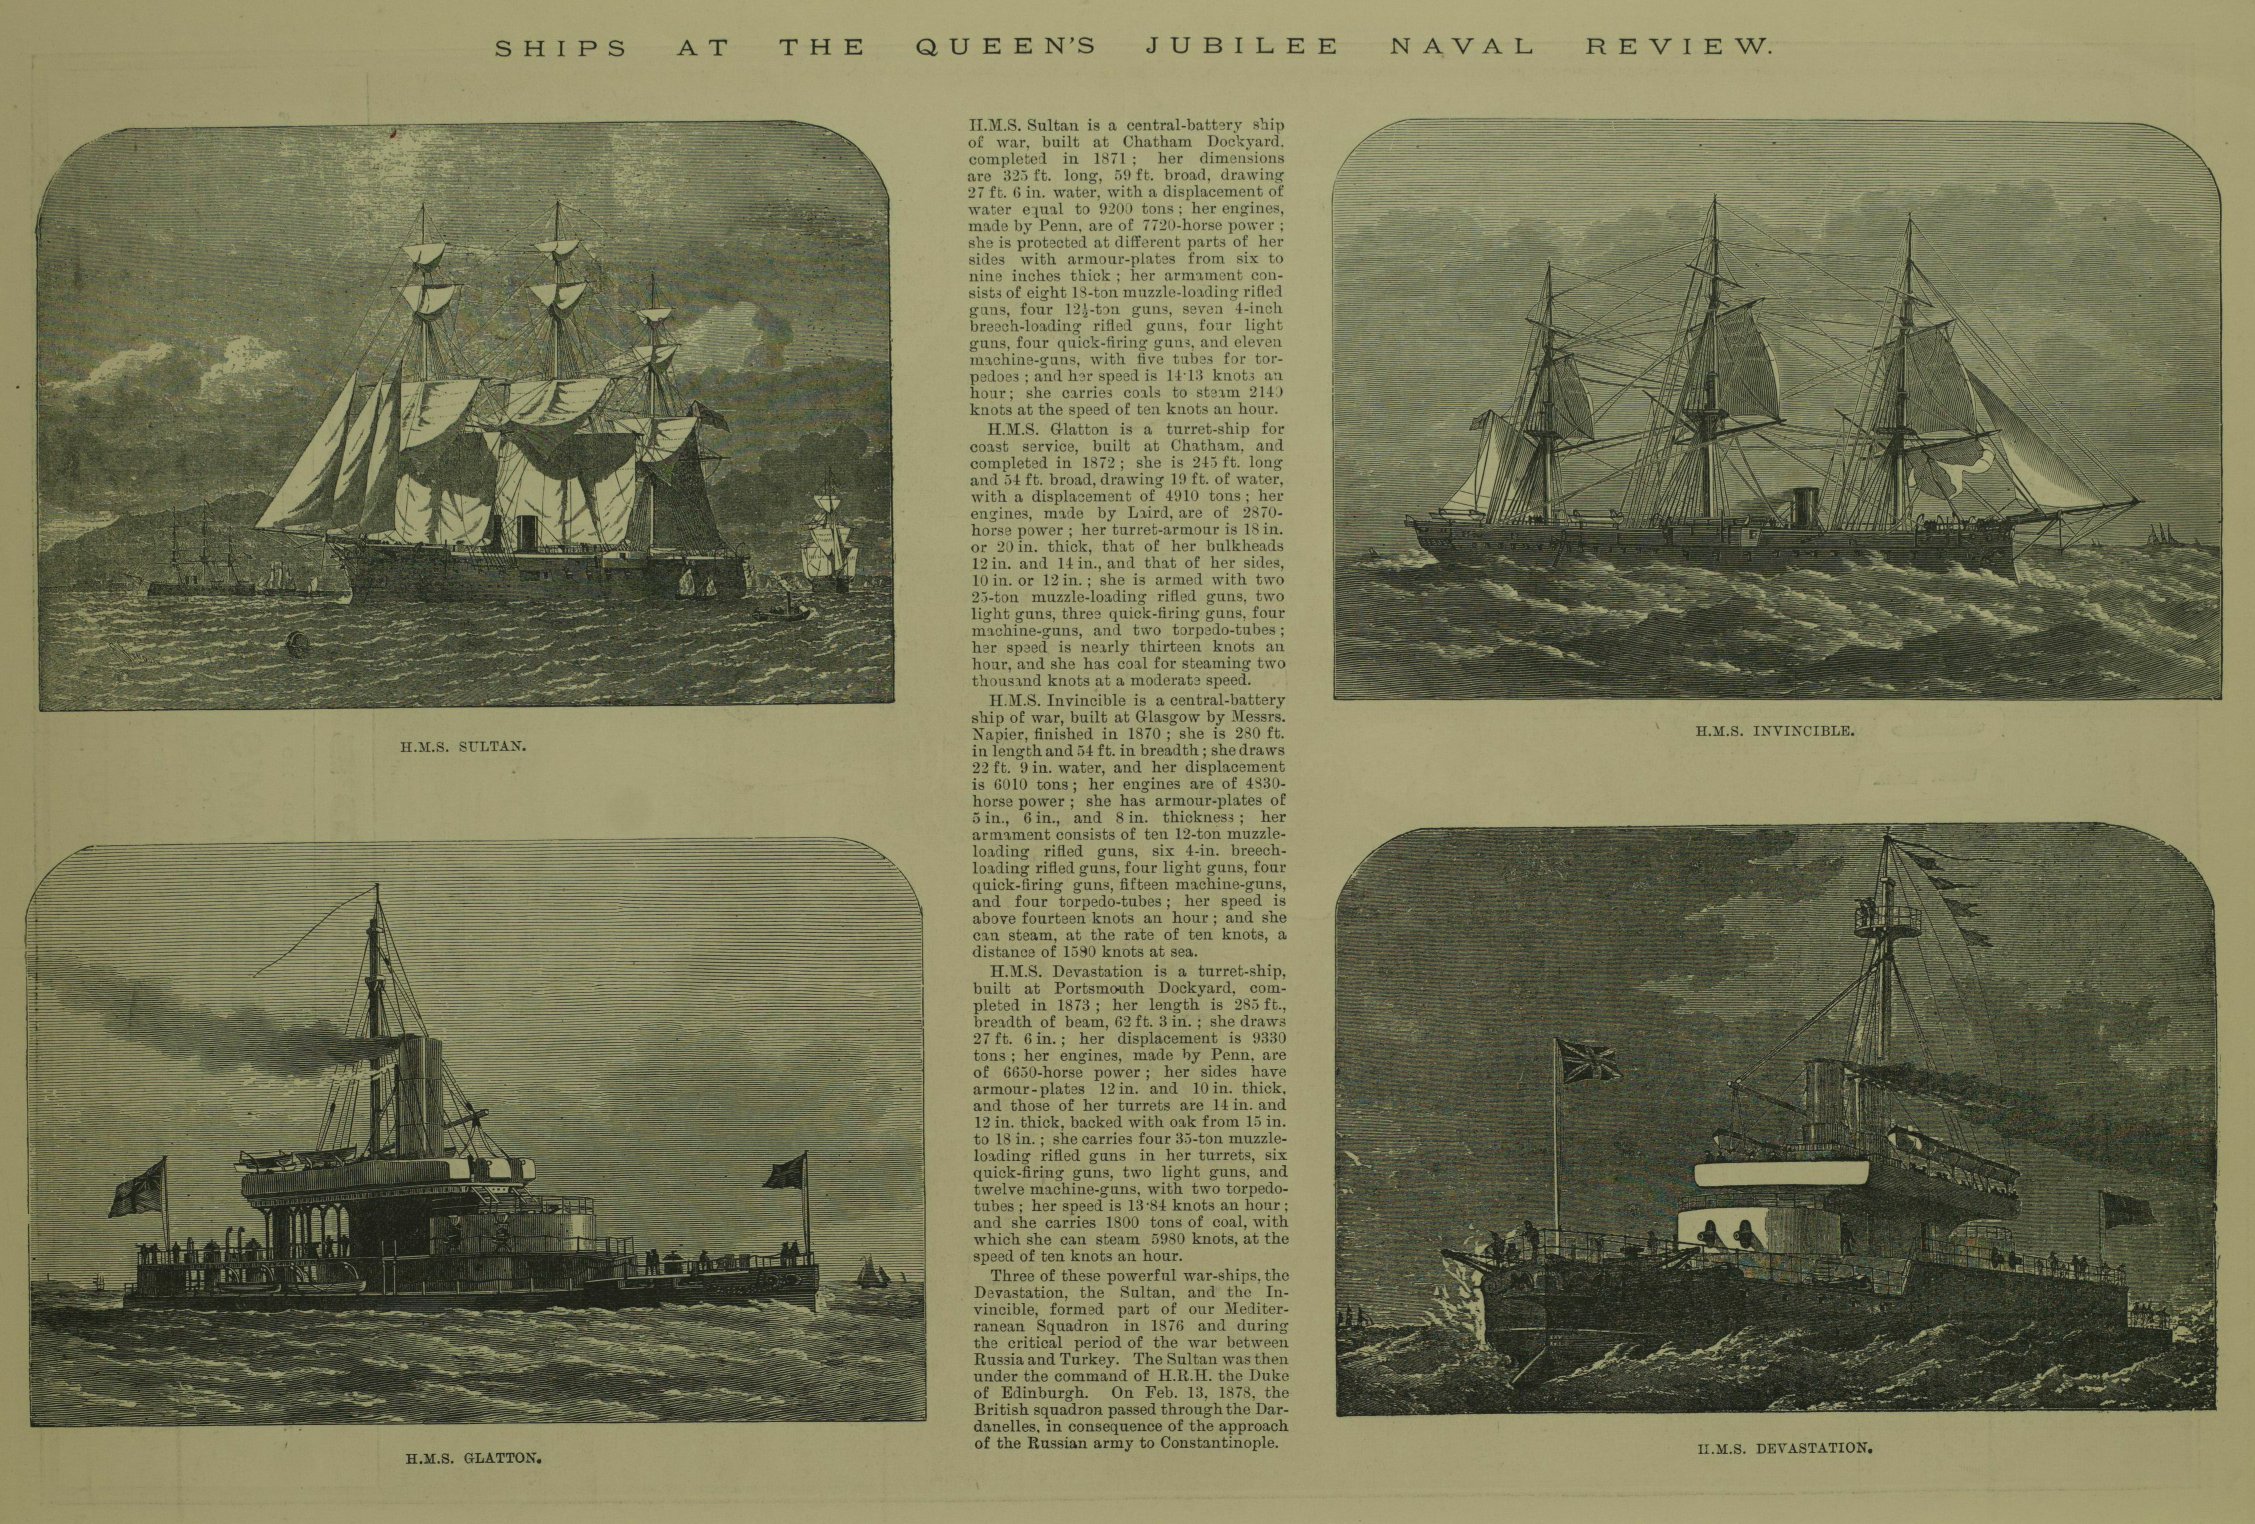 intricate illustrations of British warships from 1887